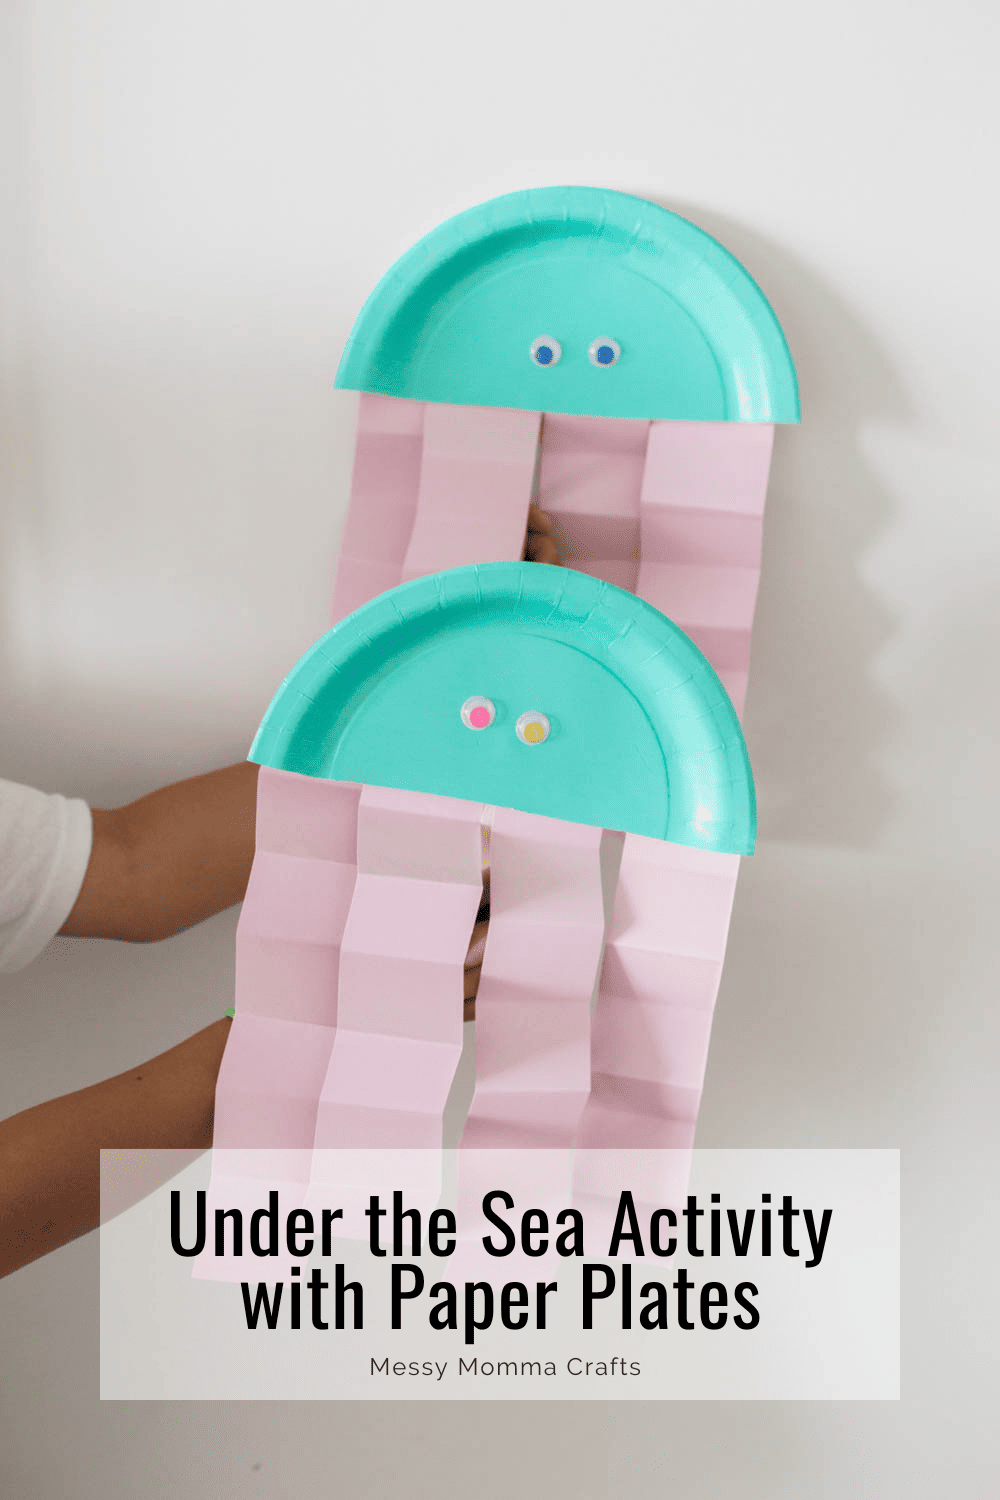 Two jelly fish crafts made of paper plates and cardstock